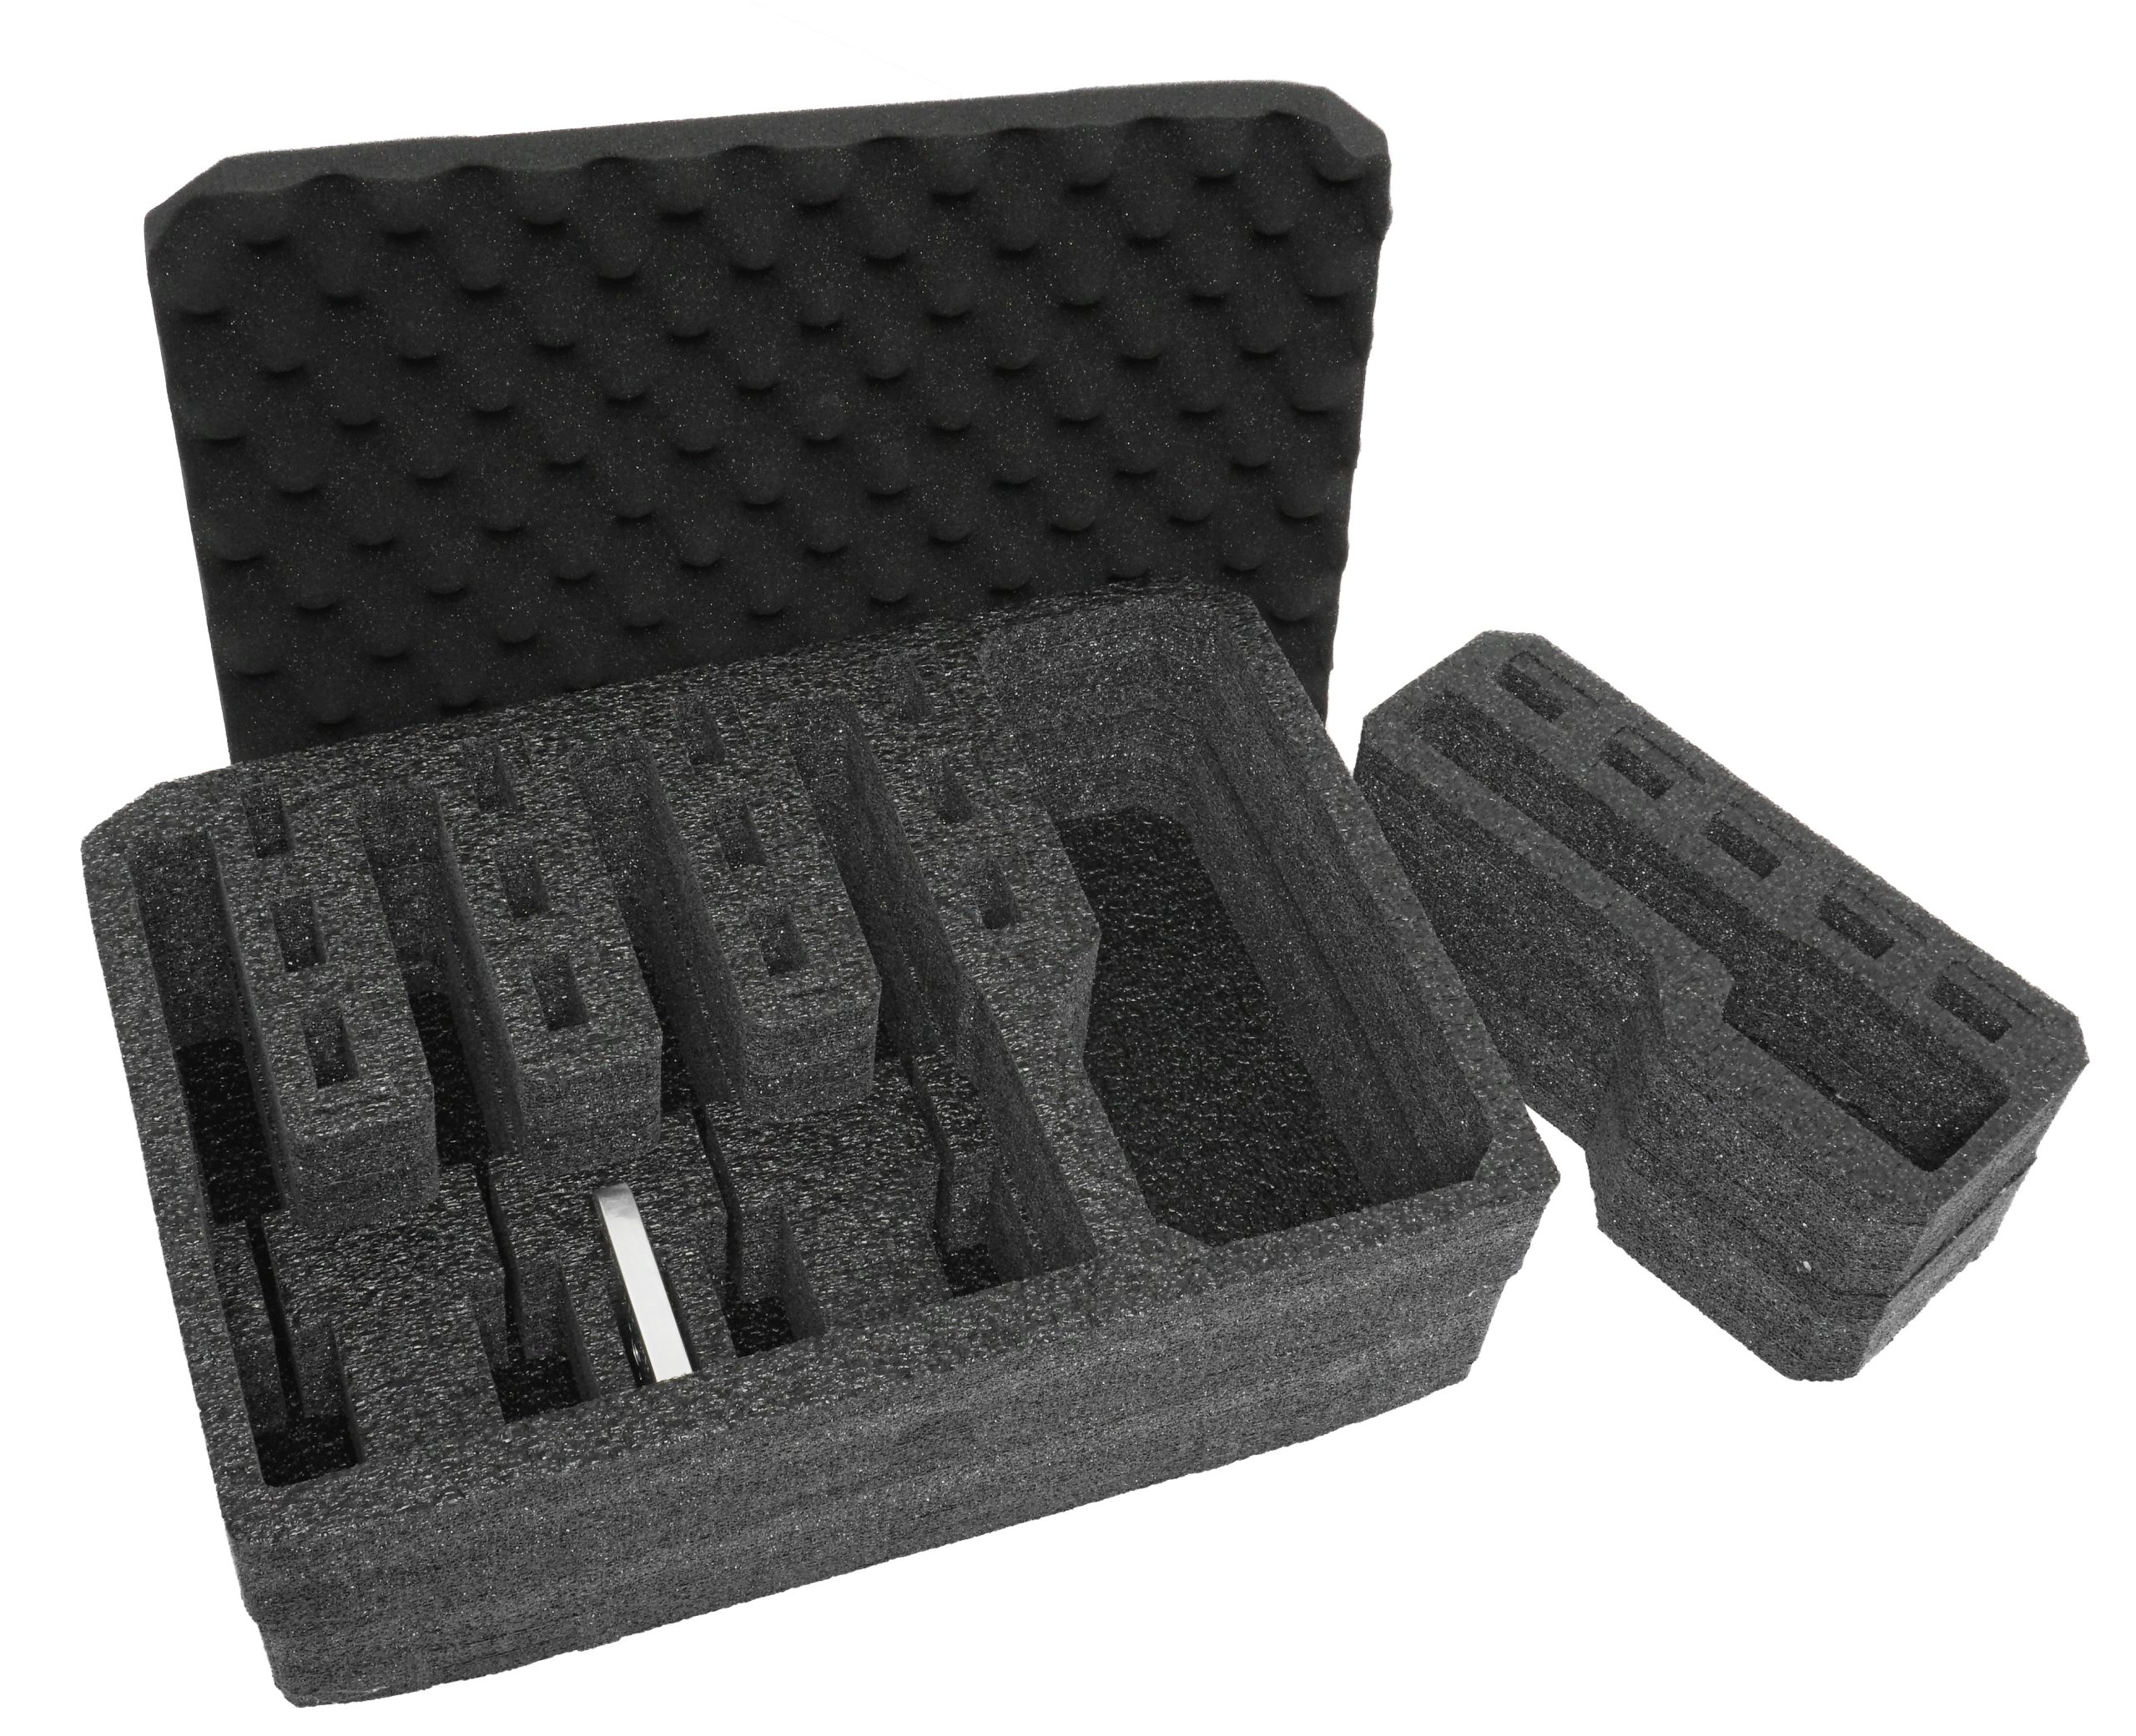 5 Pistol 18 Magazine Storage Foam Insert For V300 Vault Case By Pelican  2  Piece Set Pre-Cut Military Grade Polyethylene Foam Base Insert And Lid  Liner (Case Not Included) 